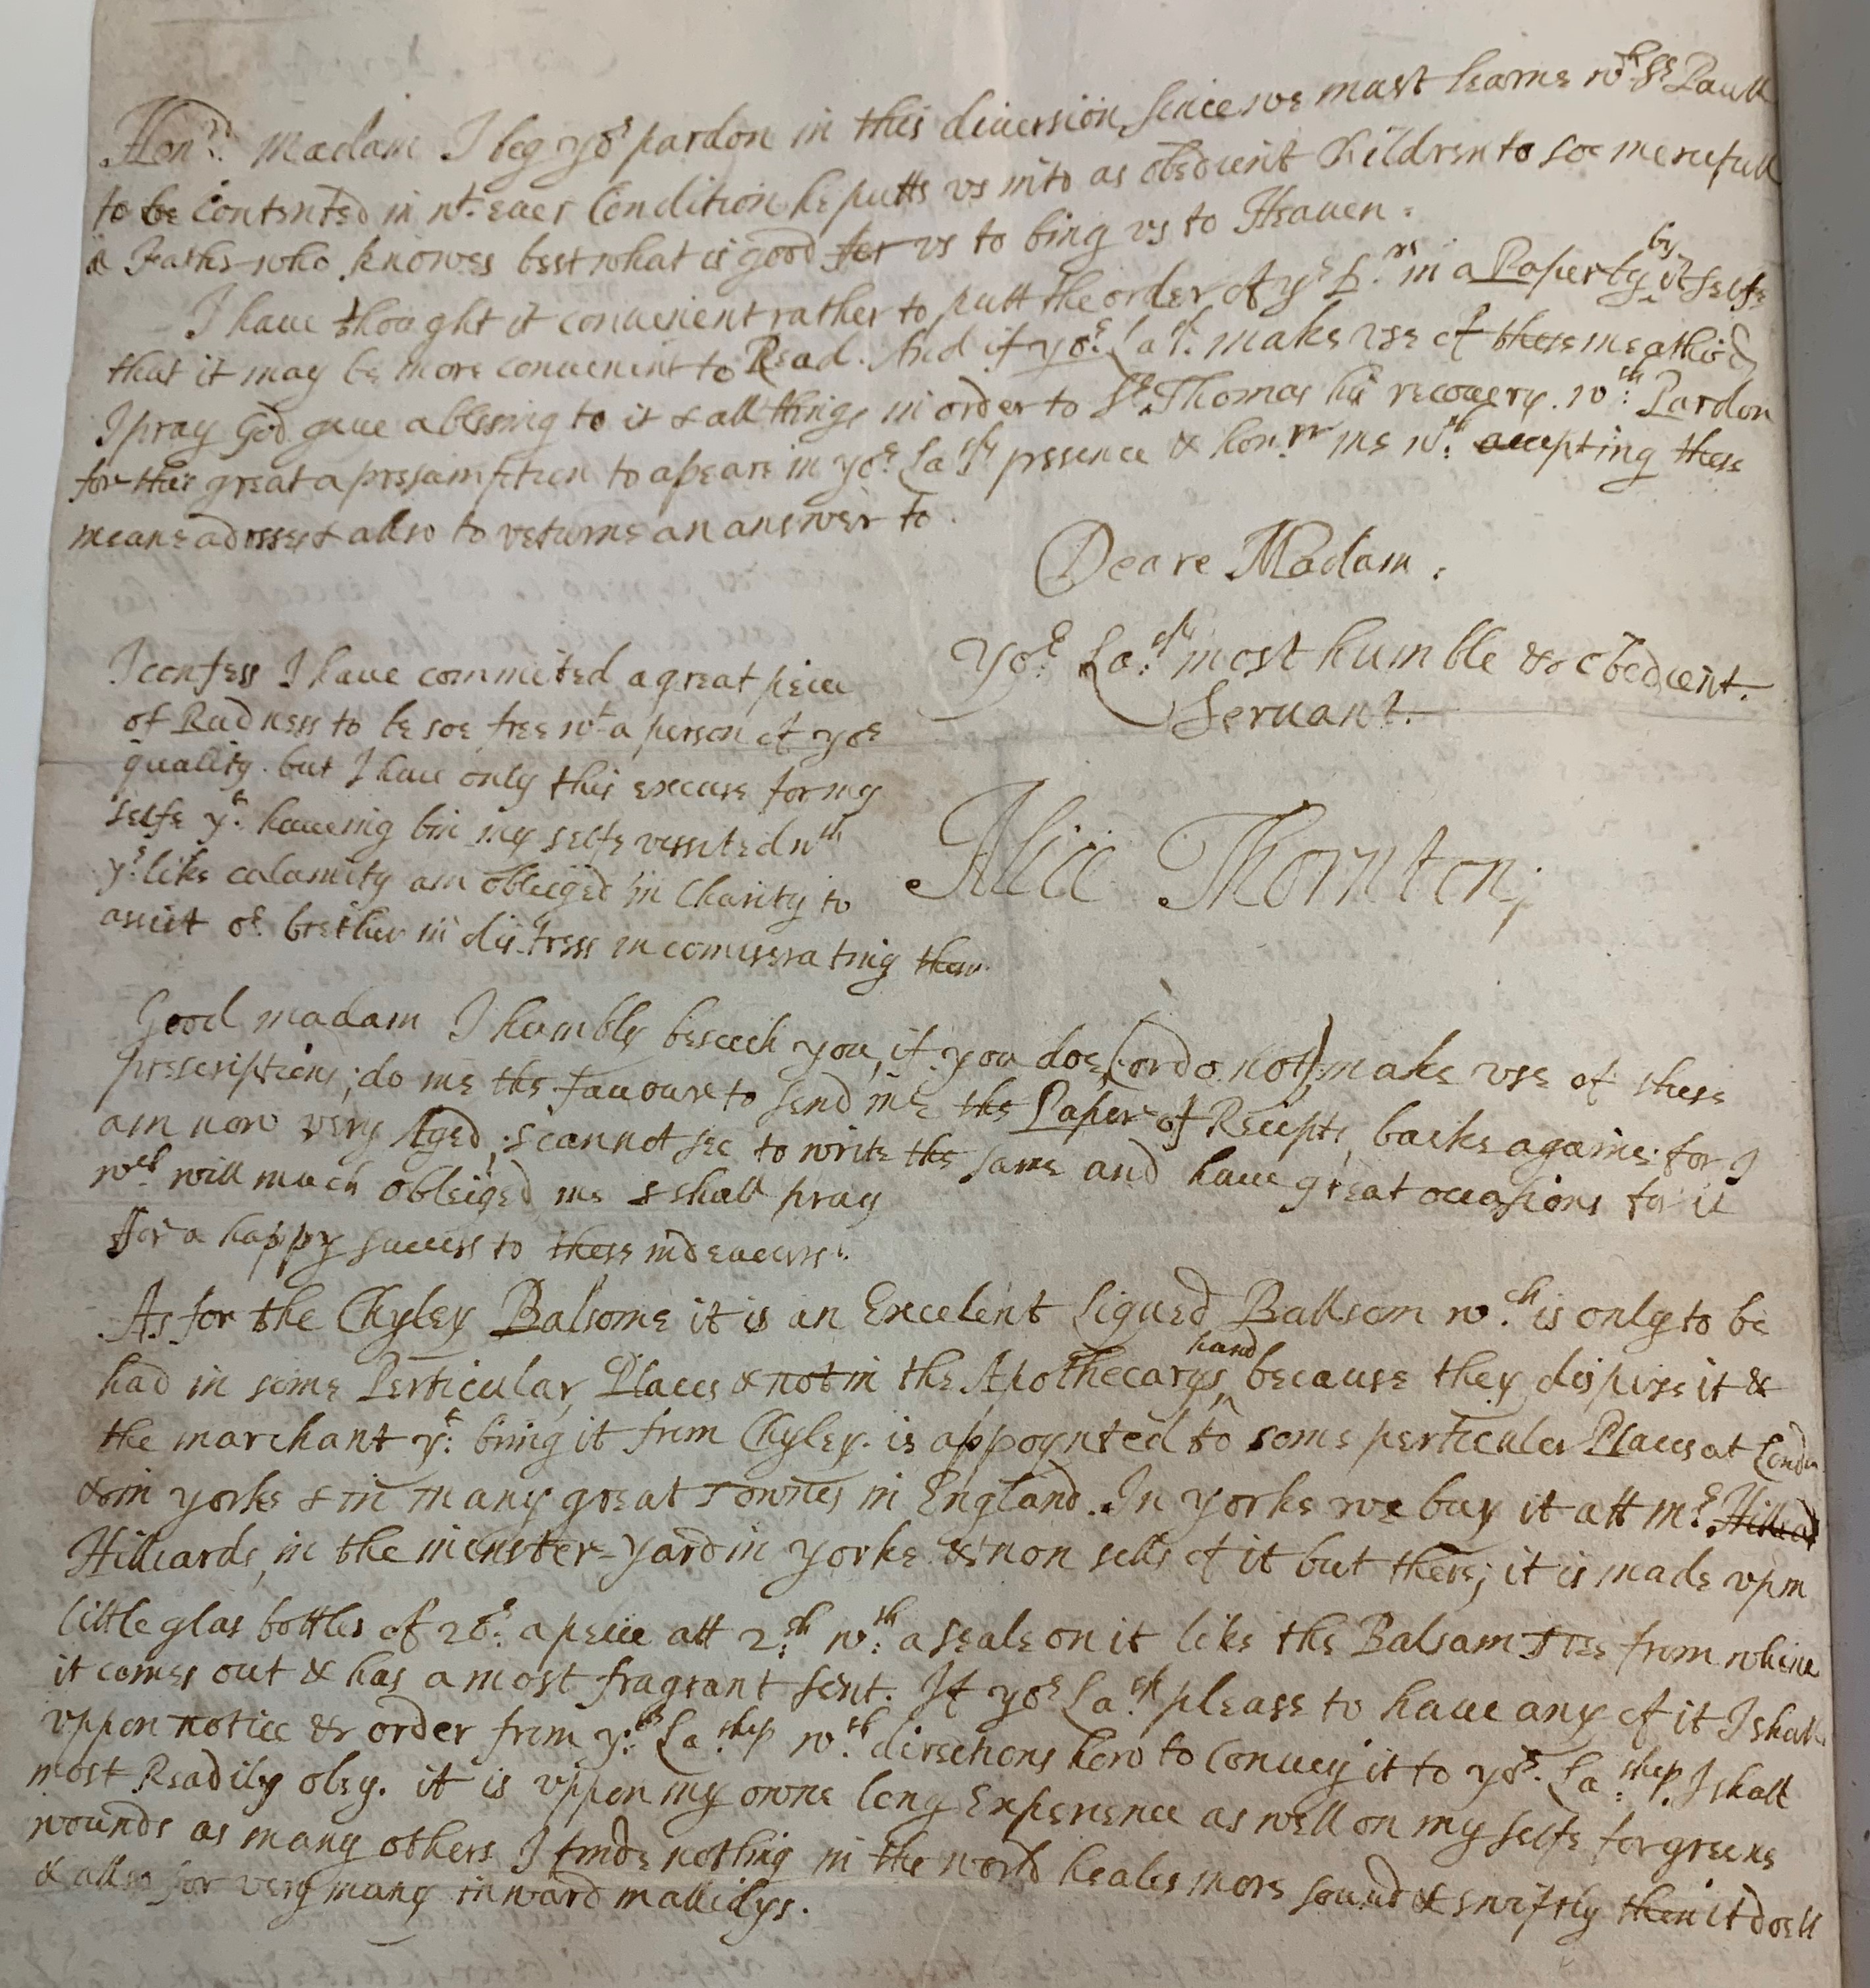 The back half of Alice Thornton's letter to Lady Yarburgh, showing her signature, and some details of the now-lost recipe as a postscript